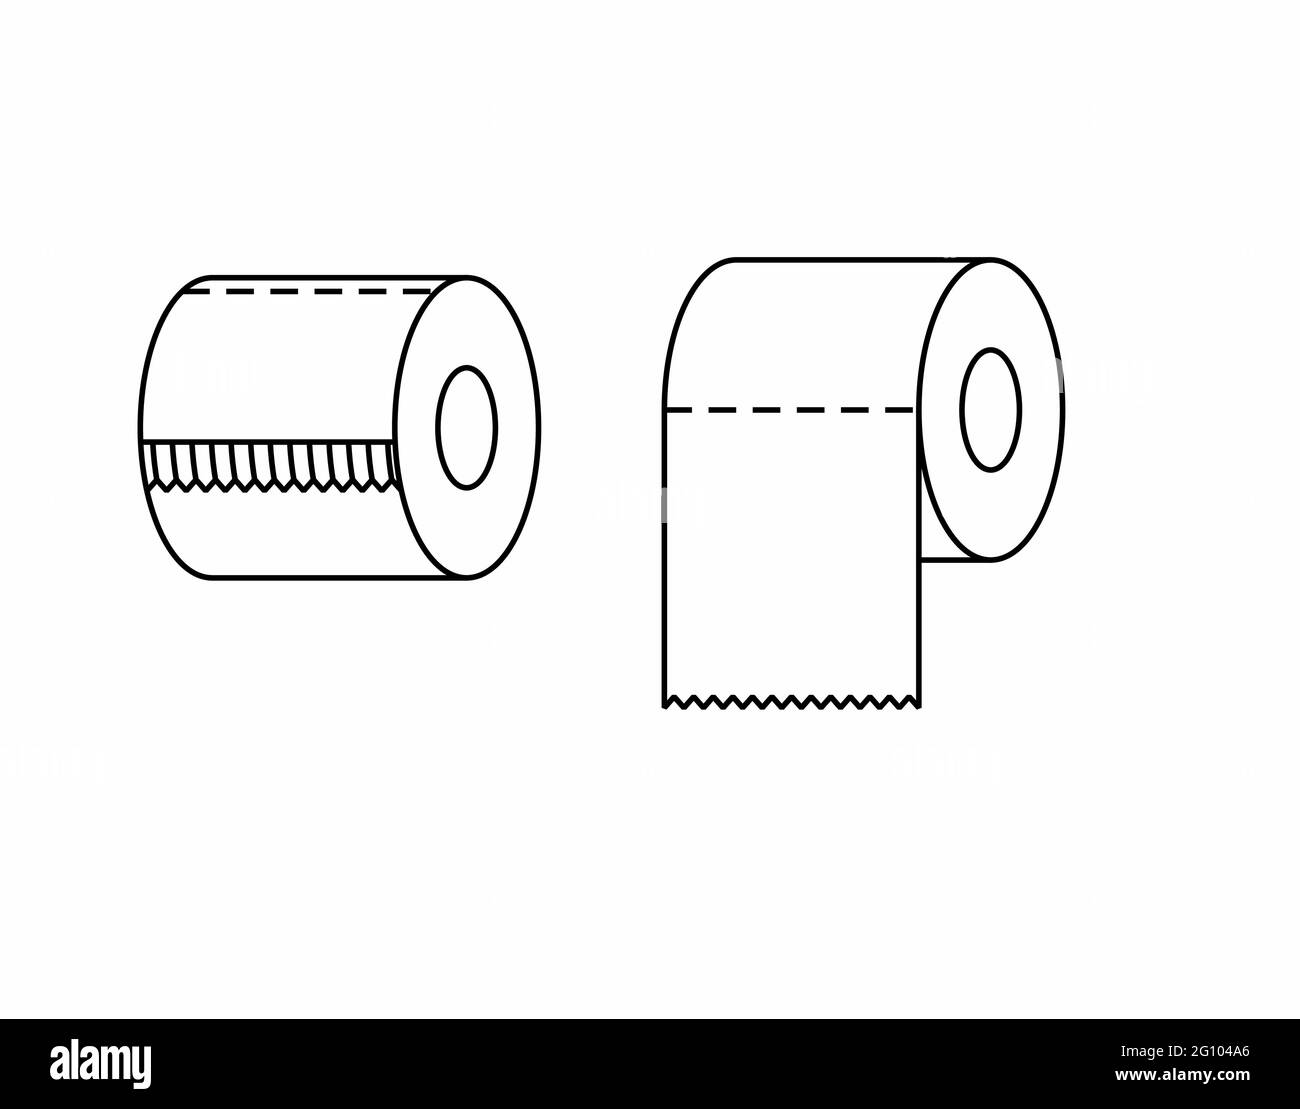 Toilet tissue paper roll with ridges a full roll and a roll in use line art icon, sign or logo for signs, apps and websites in black and white vector Stock Vector